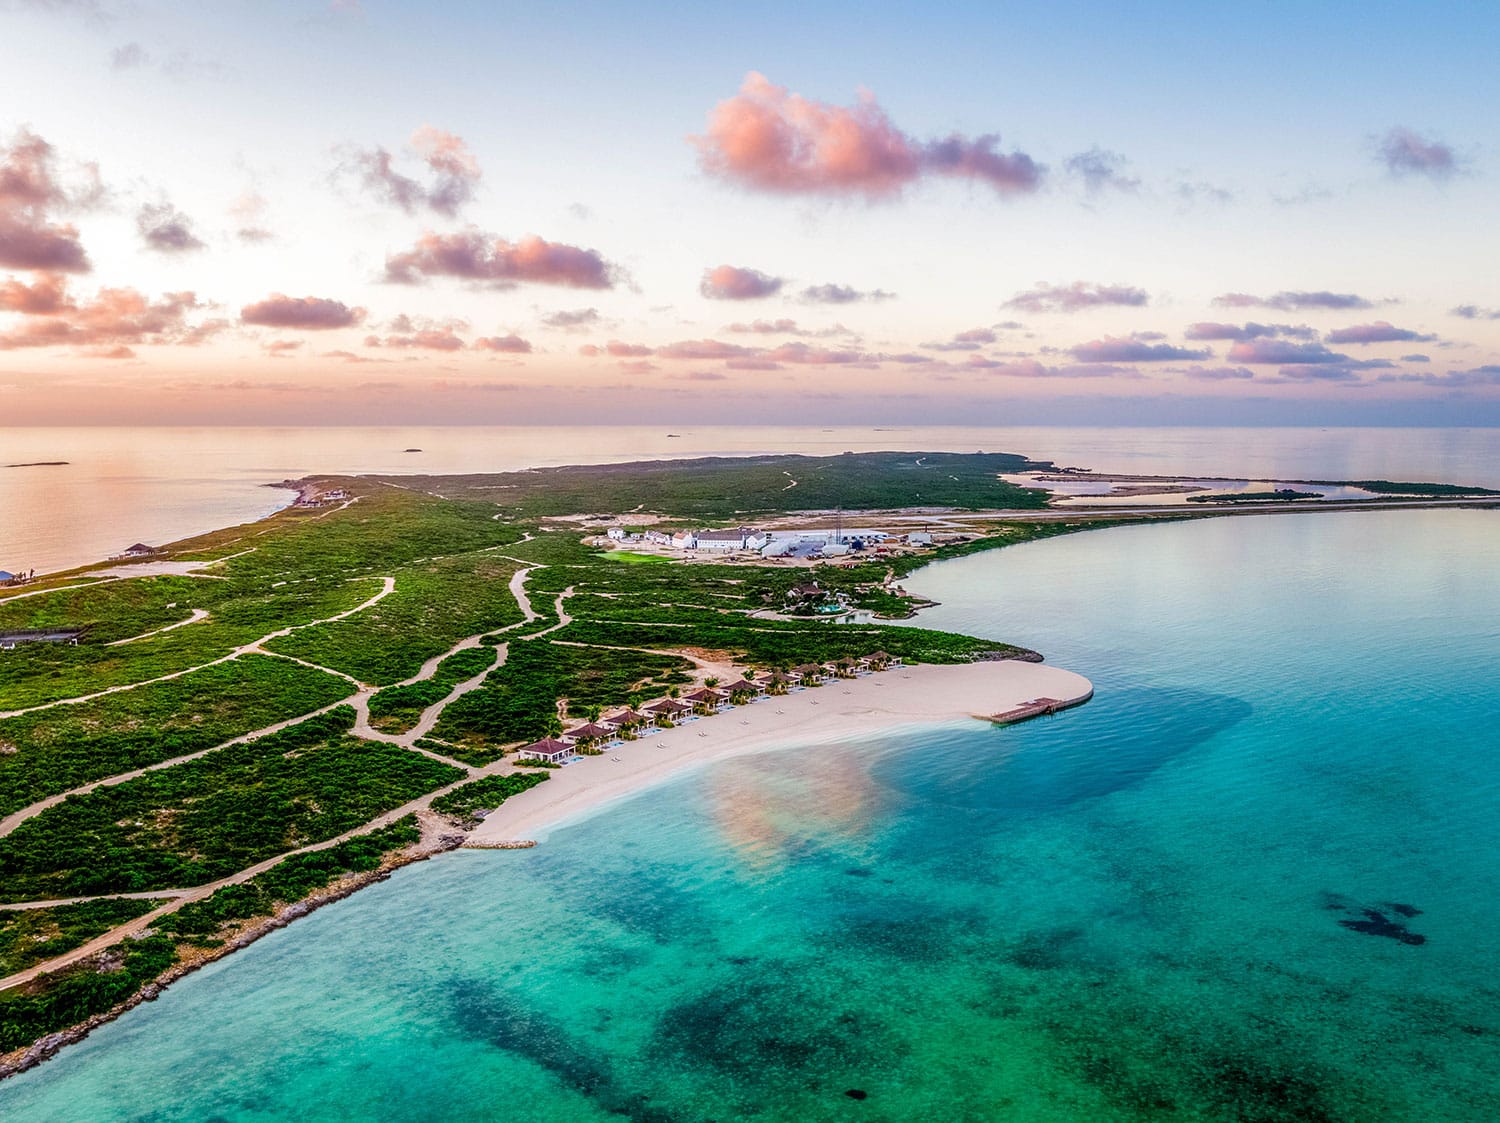 An aerial view of the property and accommodations at Ambergris Cay in Turks and Caicos.